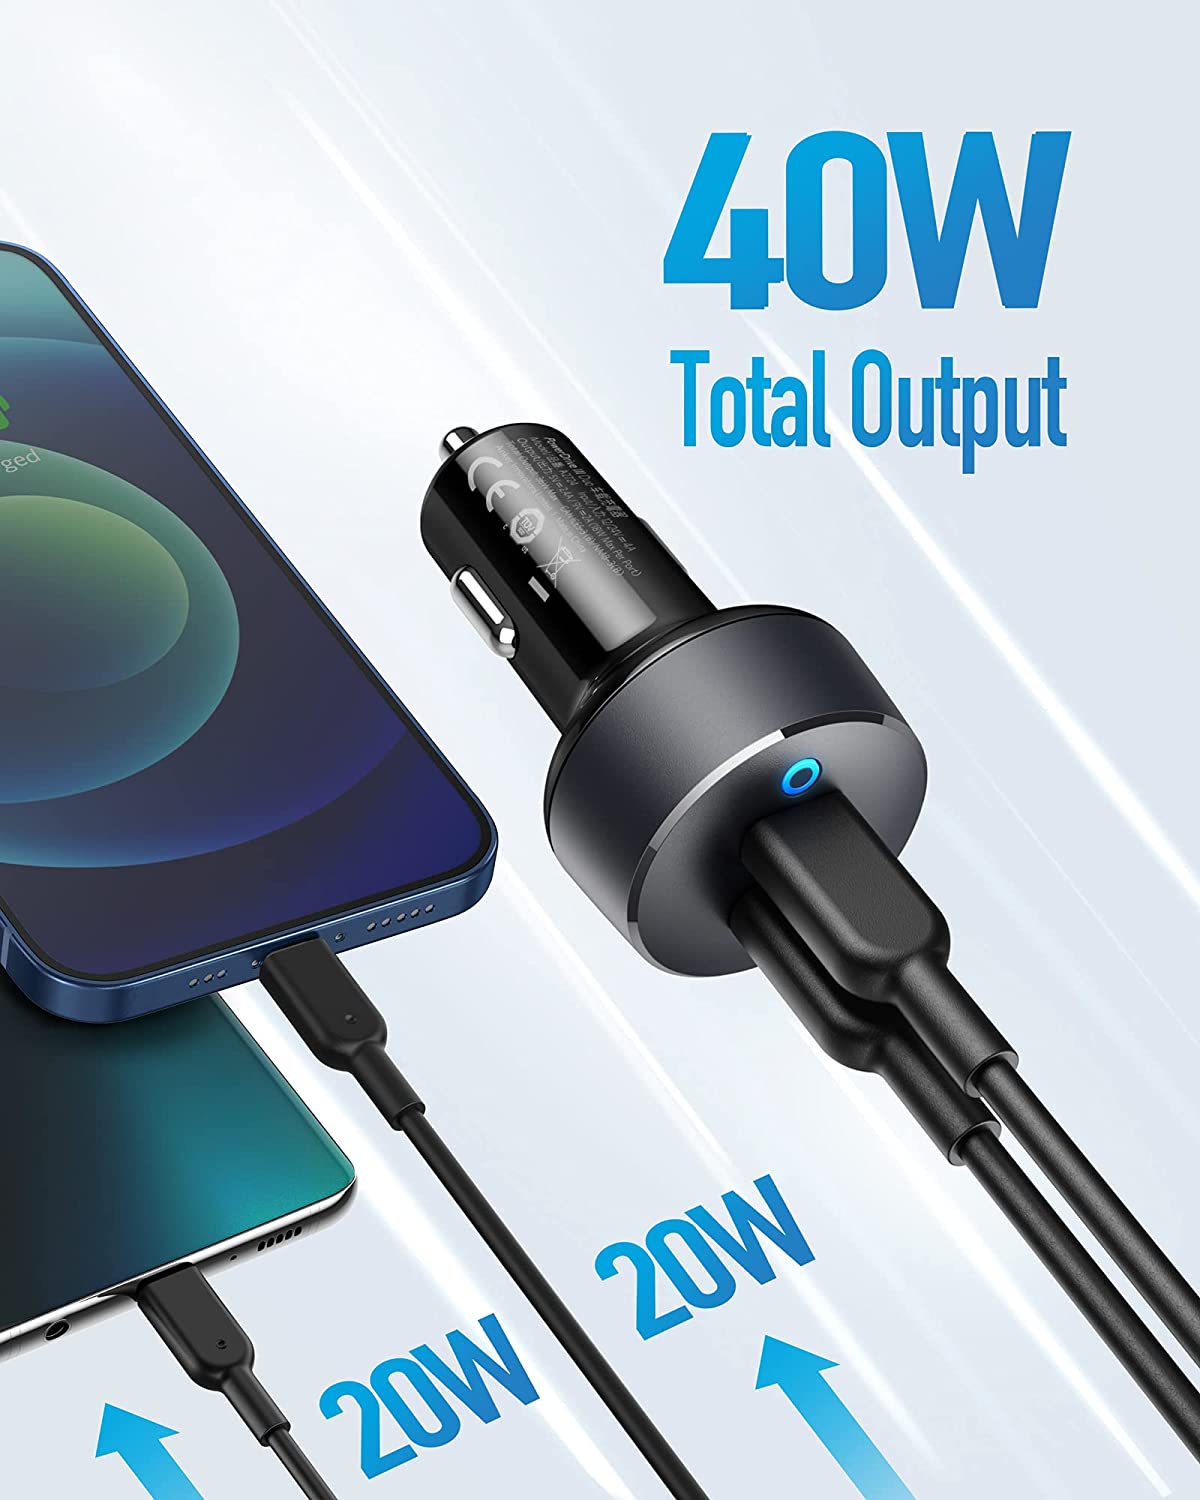 Anker USB C Car Charger, 40W 2-Port PowerIQ 3.0 Type C Car Adapter, PowerDrive III Duo with Power Delivery